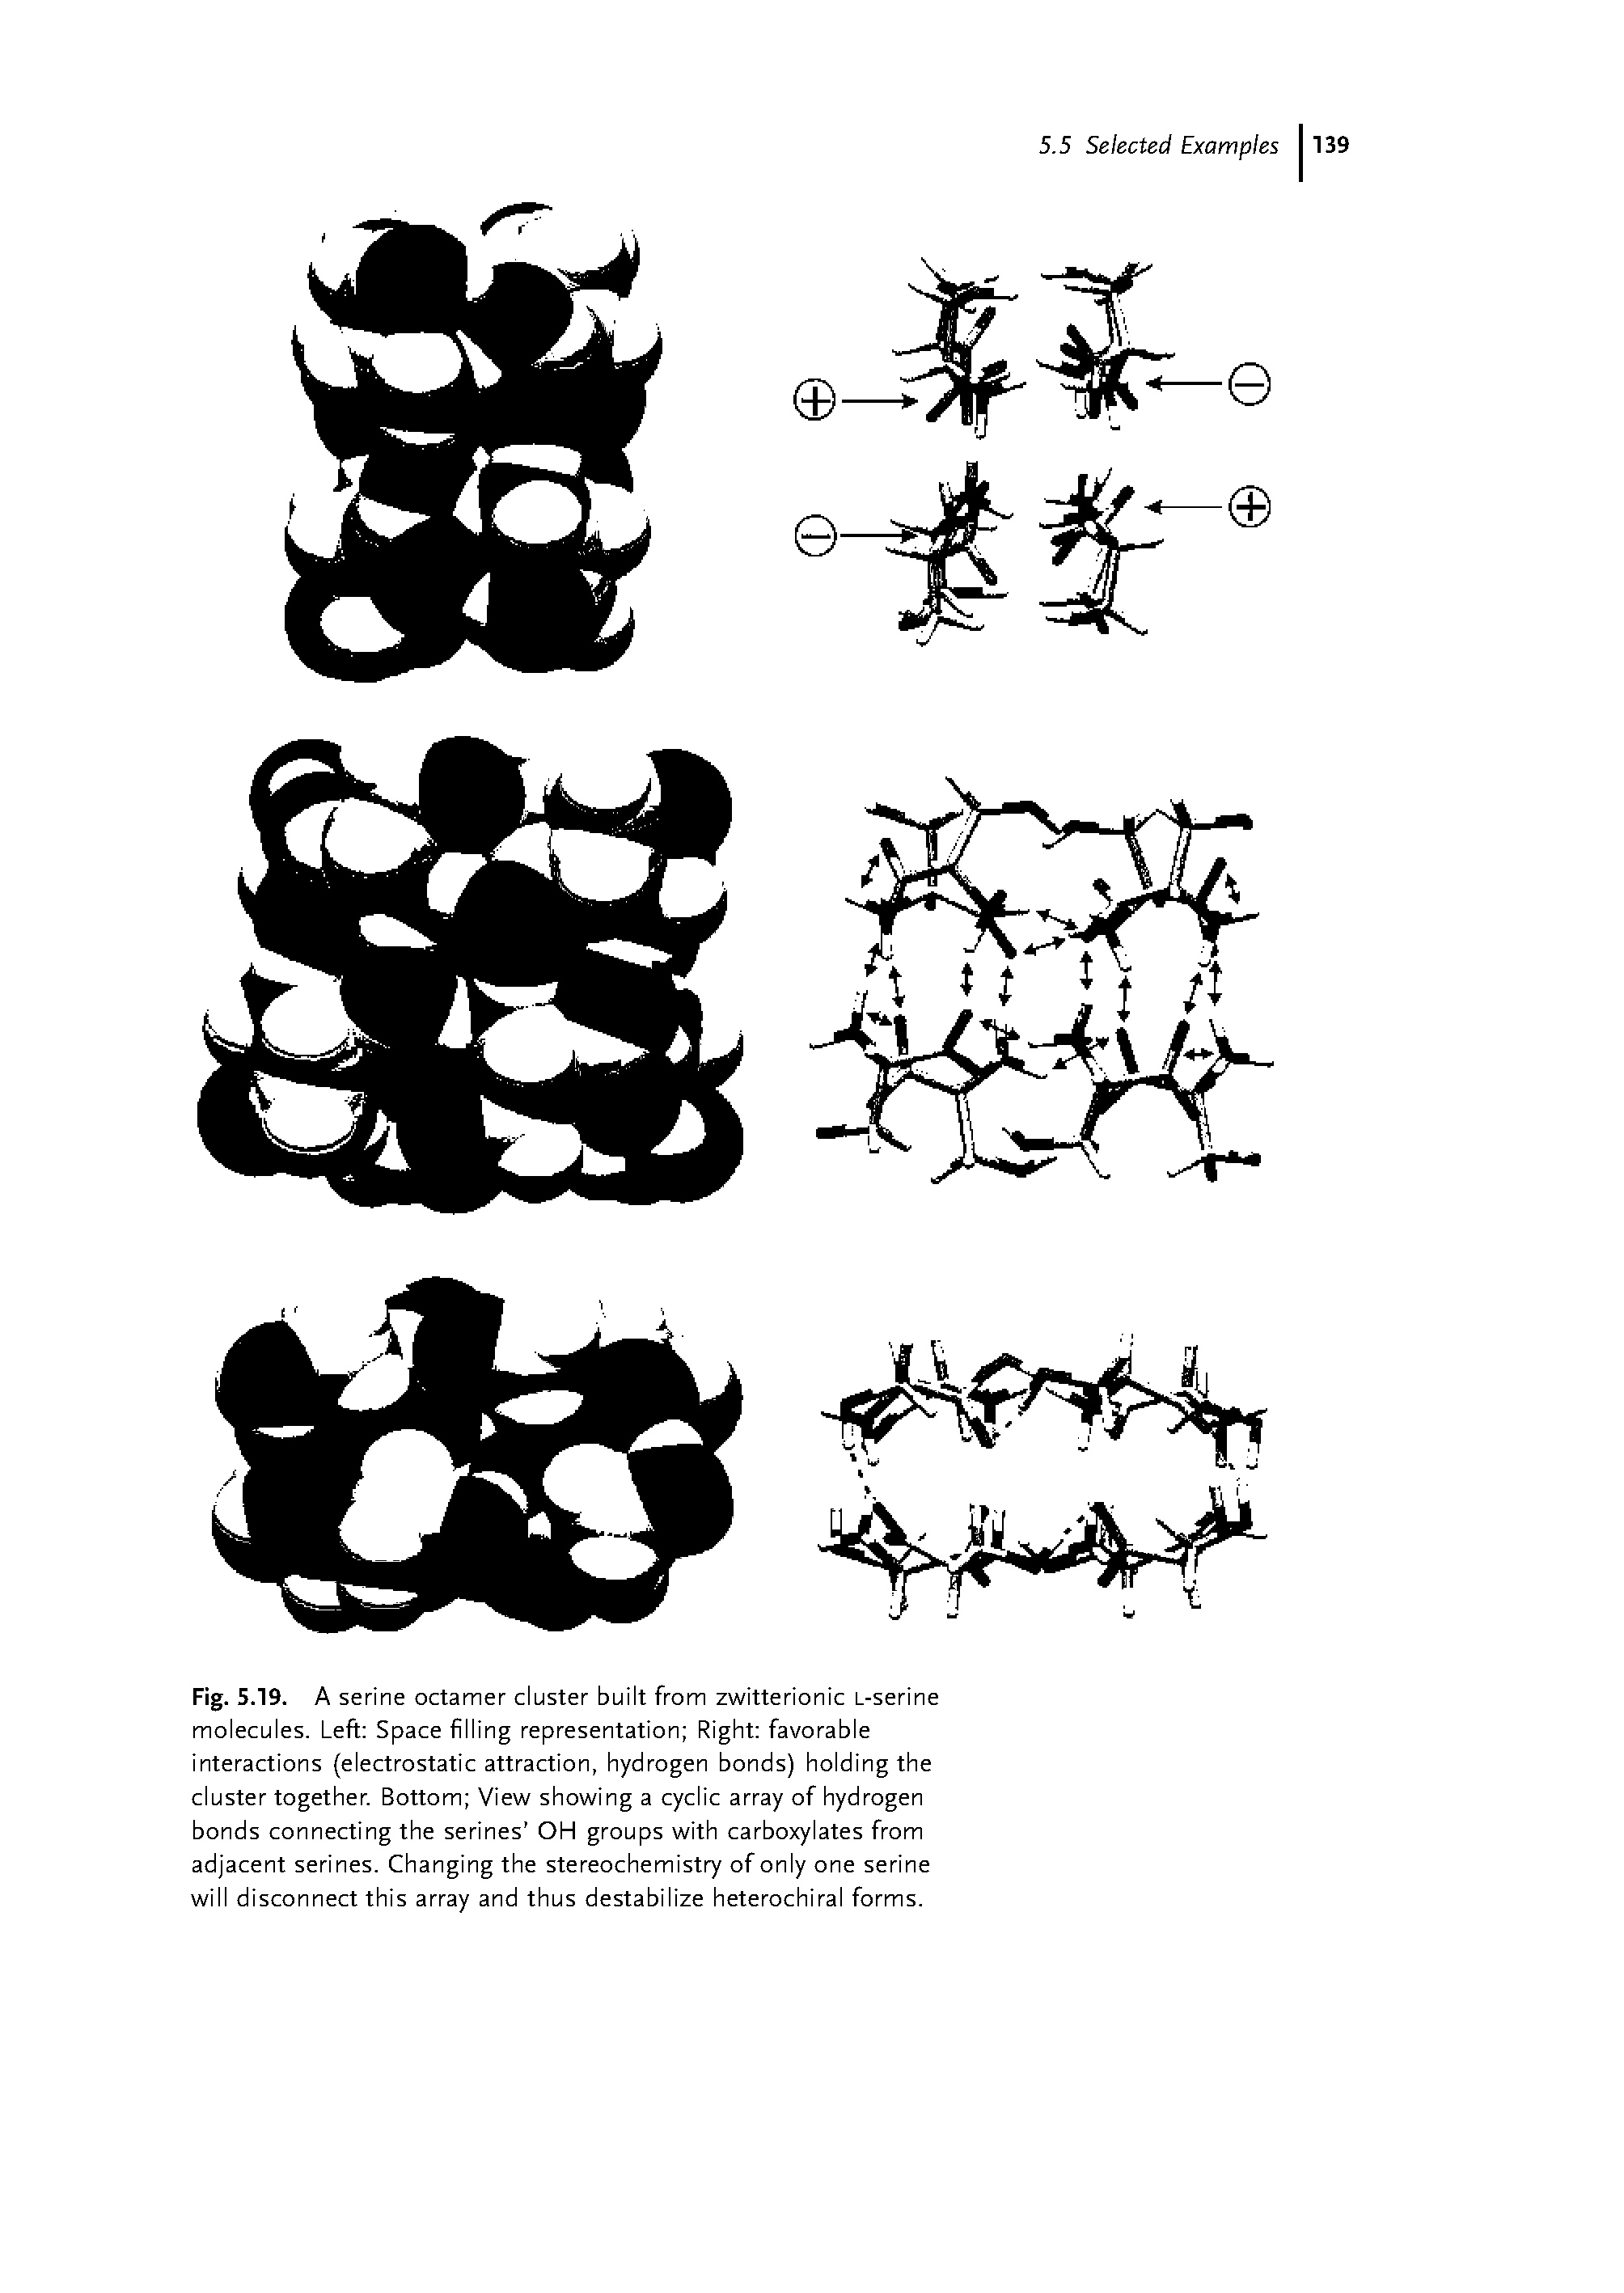 Fig. 5.19. A serine octamer cluster built from zwitterionic L-serine molecules. Left Space filling representation Right favorable interactions (electrostatic attraction, hydrogen bonds) holding the cluster together. Bottom View showing a cyclic array of hydrogen bonds connecting the serines OH groups with carboxylates from adjacent serines. Changing the stereochemistry of only one serine will disconnect this array and thus destabilize heterochiral forms.